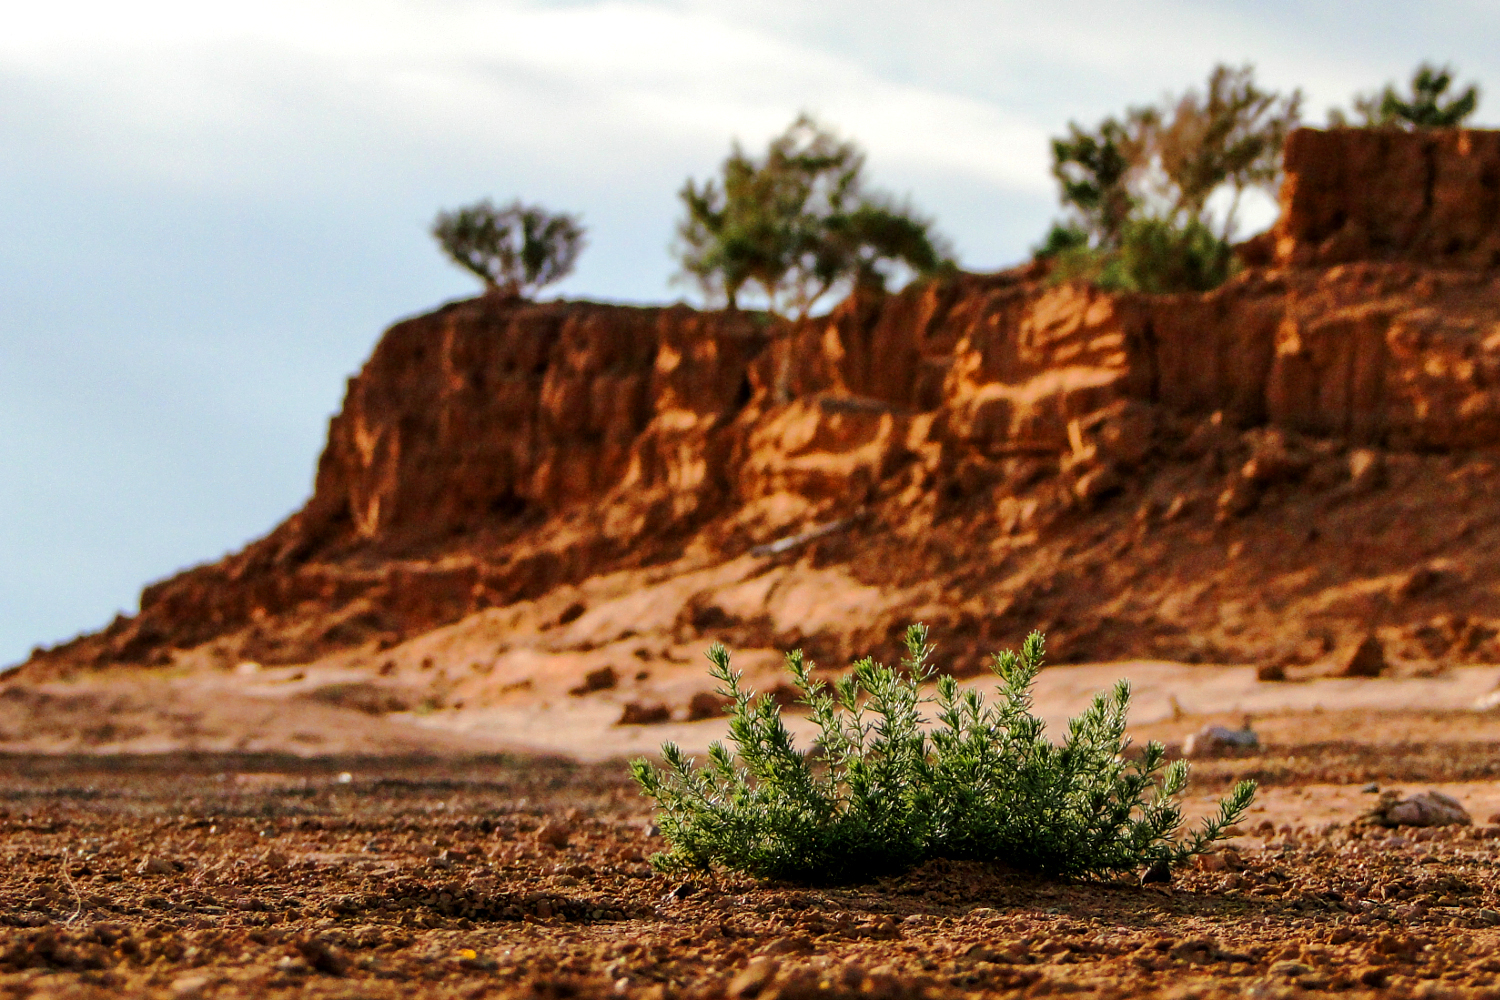 The Mongolian name 'Bayanzag' refers to the area's abundance of saxual shrubs. Image by Stephen Lioy / Lonely Planet